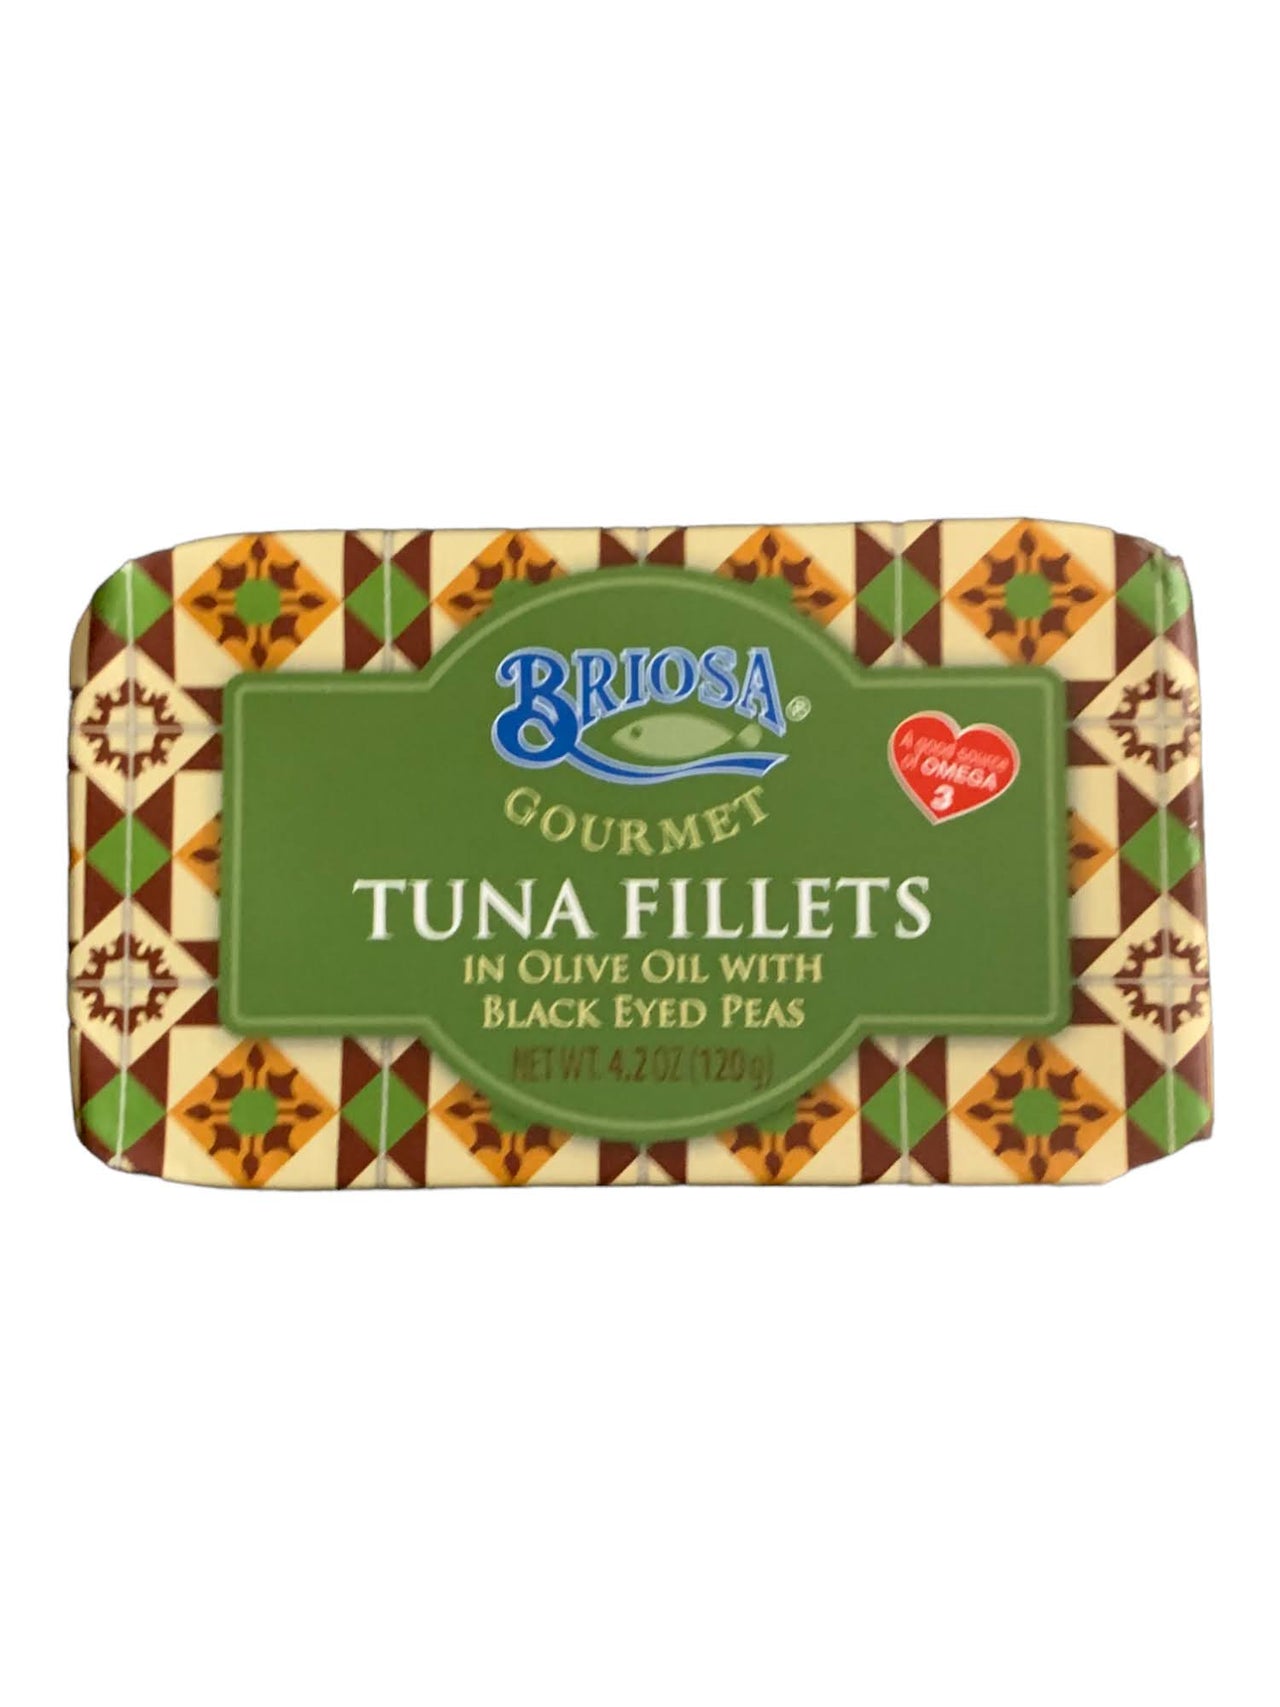 Briosa Gourmet Tuna Fillets in Olive Oil with Black Eyed Peas - 3 Pack - TinCanFish